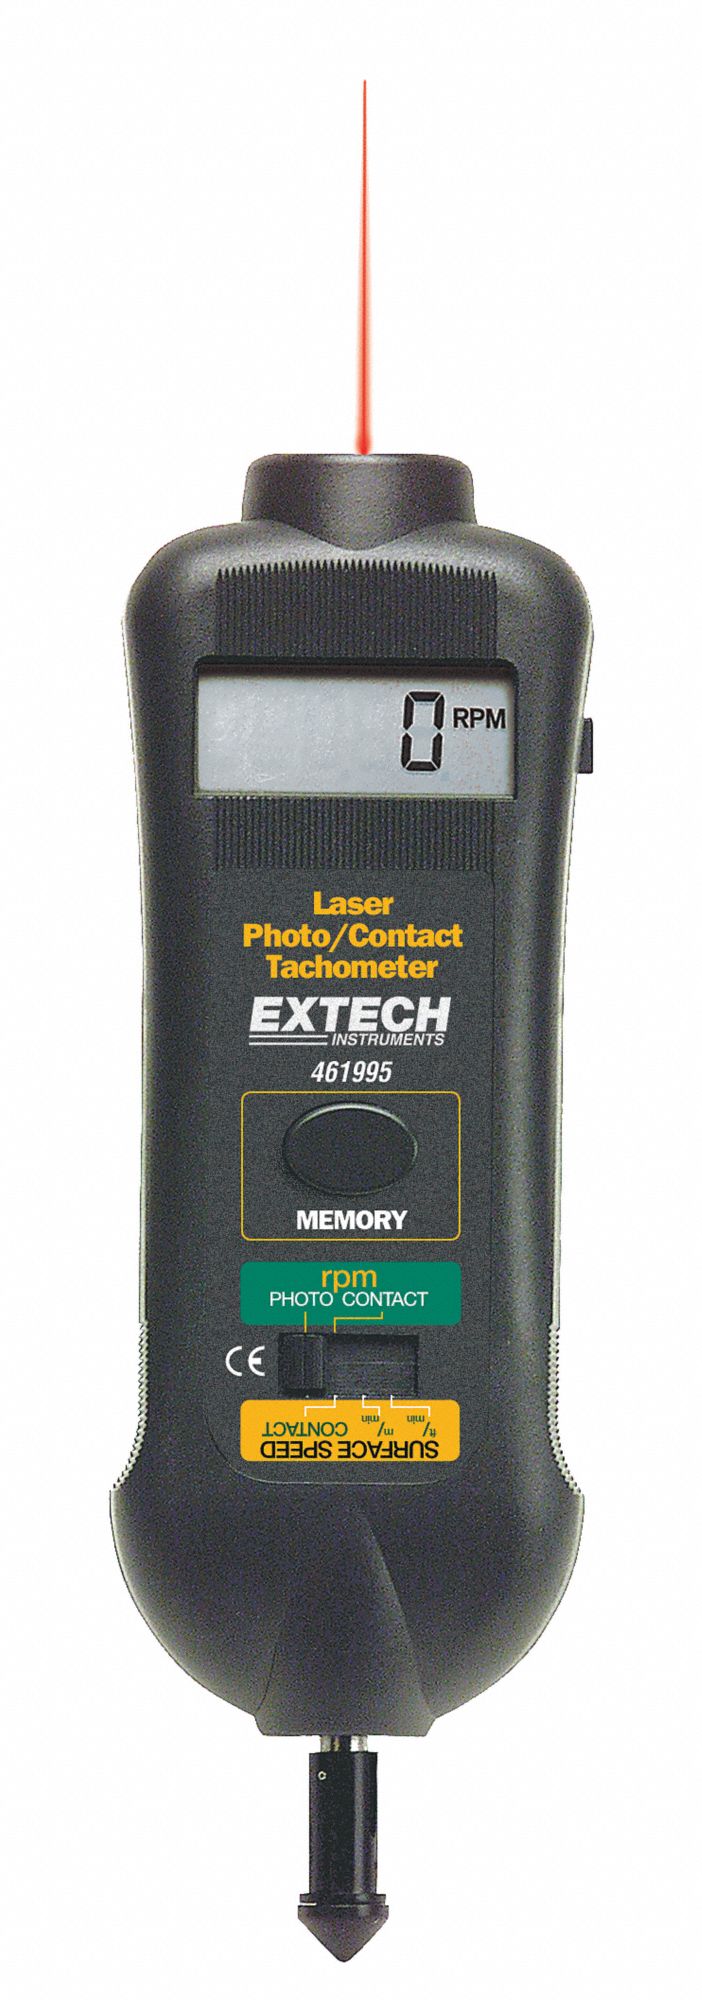 COMBINATION CONTACT/LASER PHOTO TAC